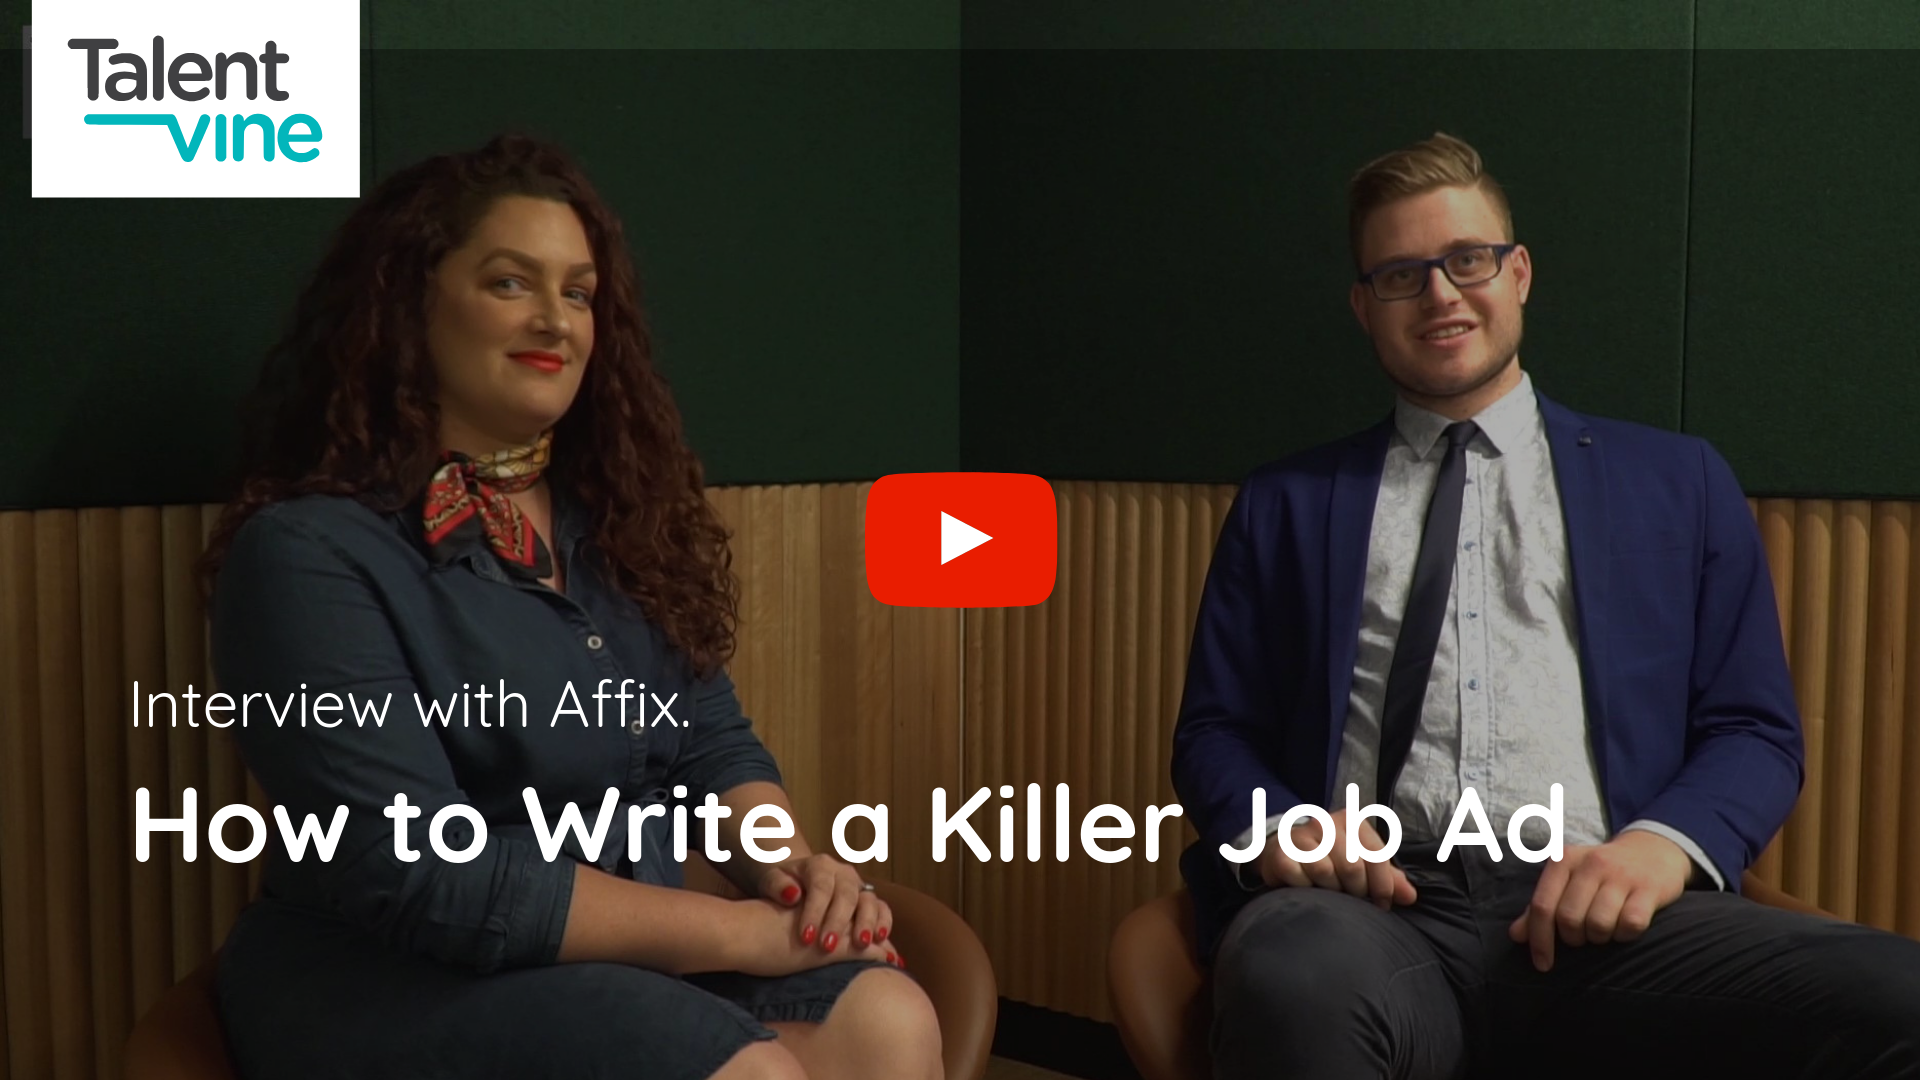 TalentVine Interview with Affix about how to write an effective job ad